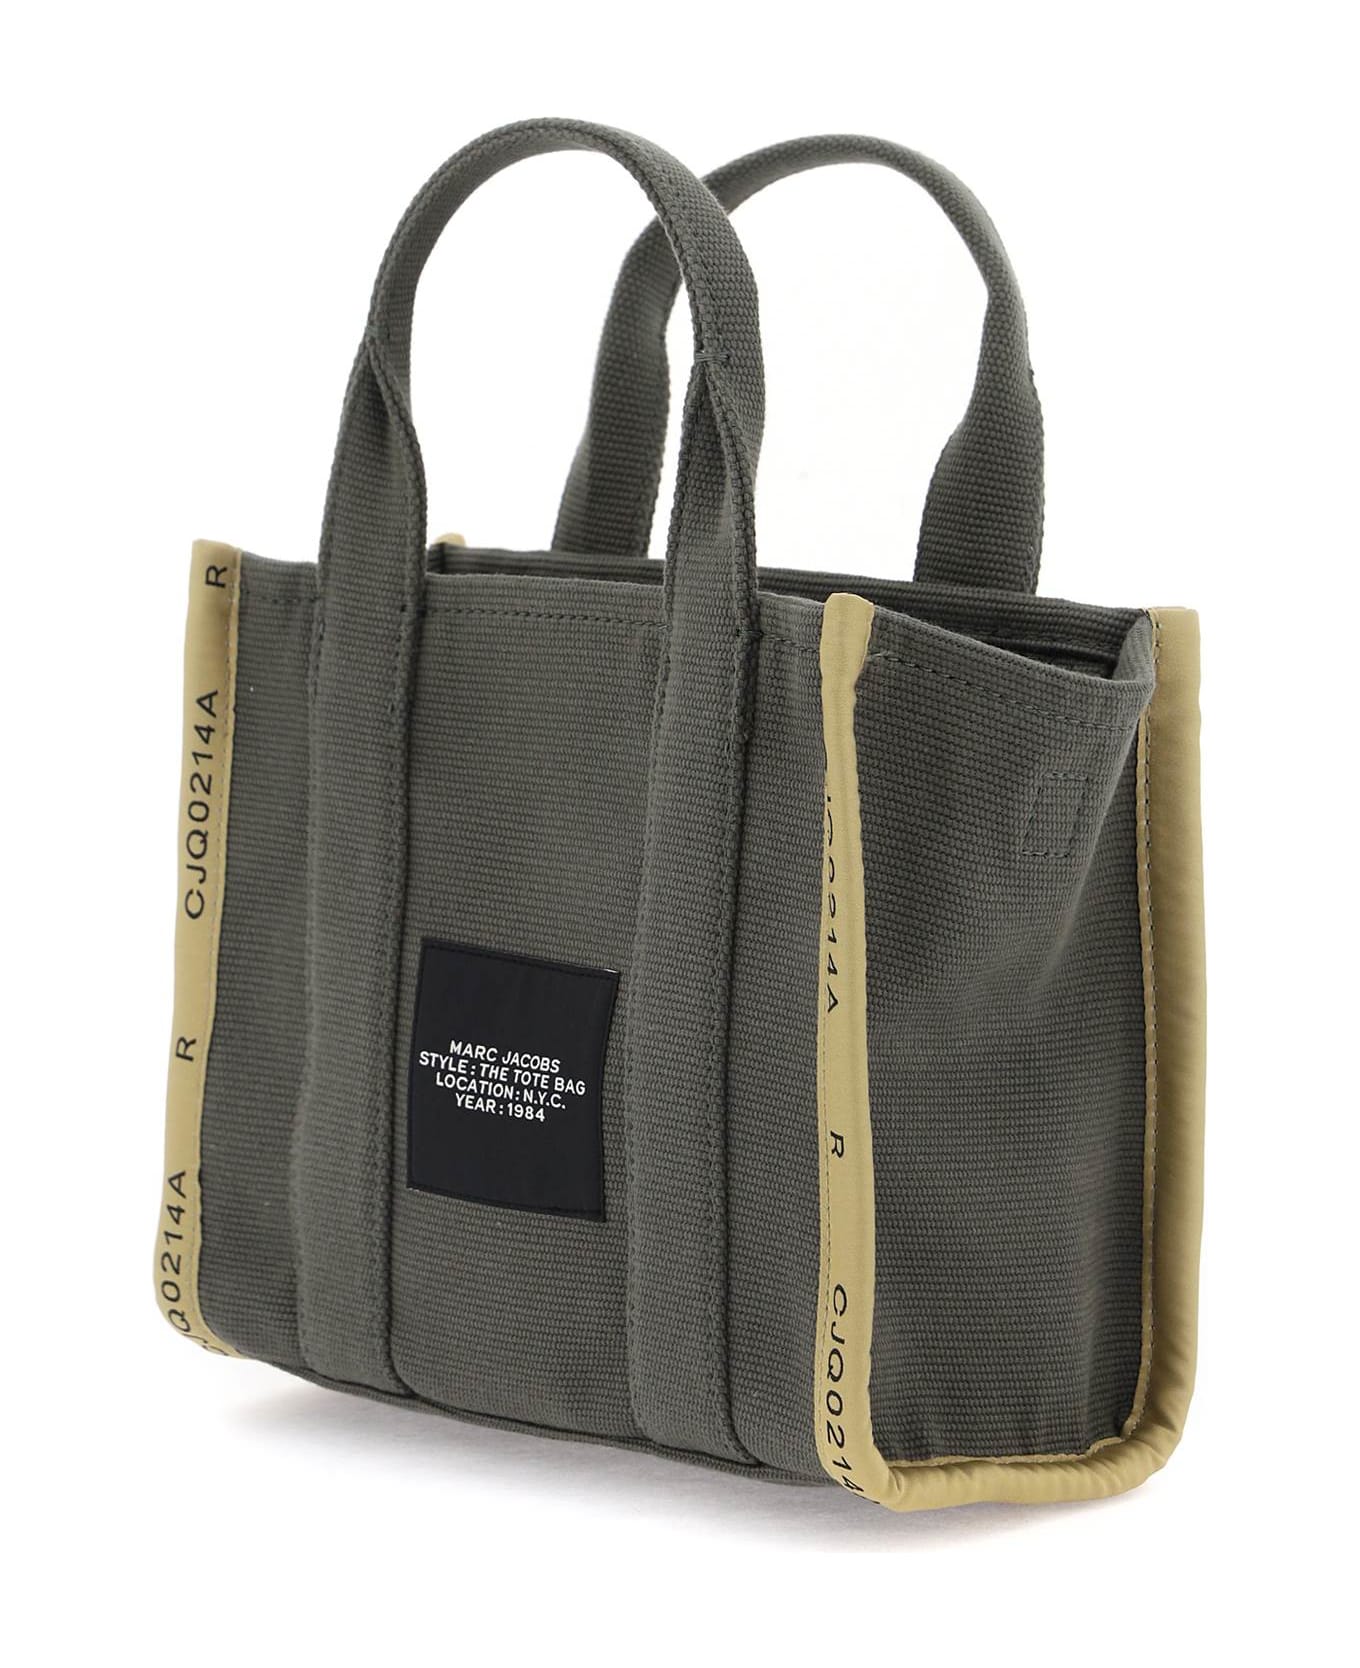 Marc Jacobs Traveler Tote In Green Cotton - BRONZE GREEN (Green) トートバッグ